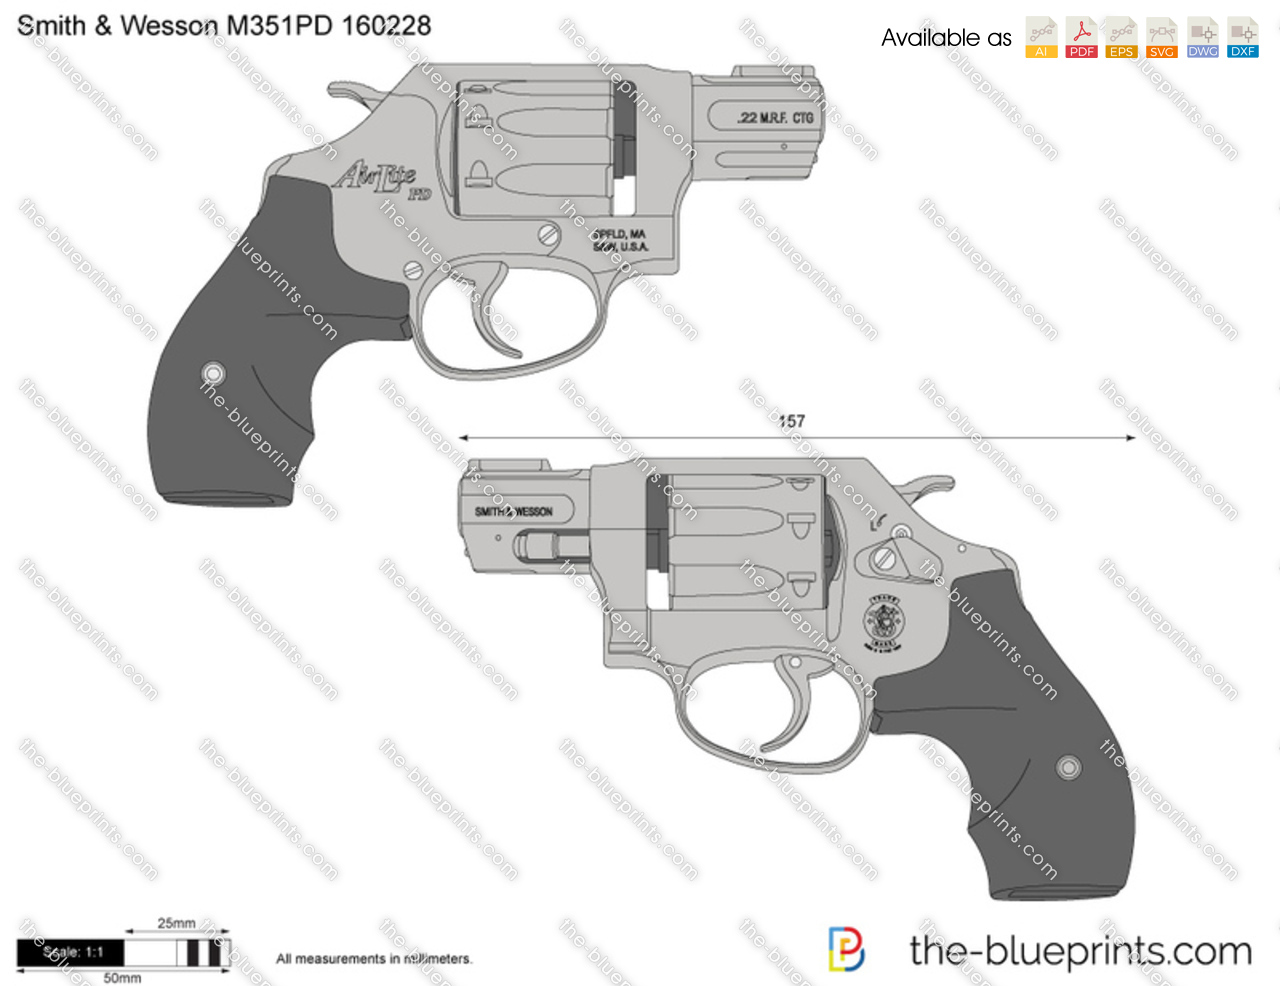 Smith & Wesson M351PD 160228